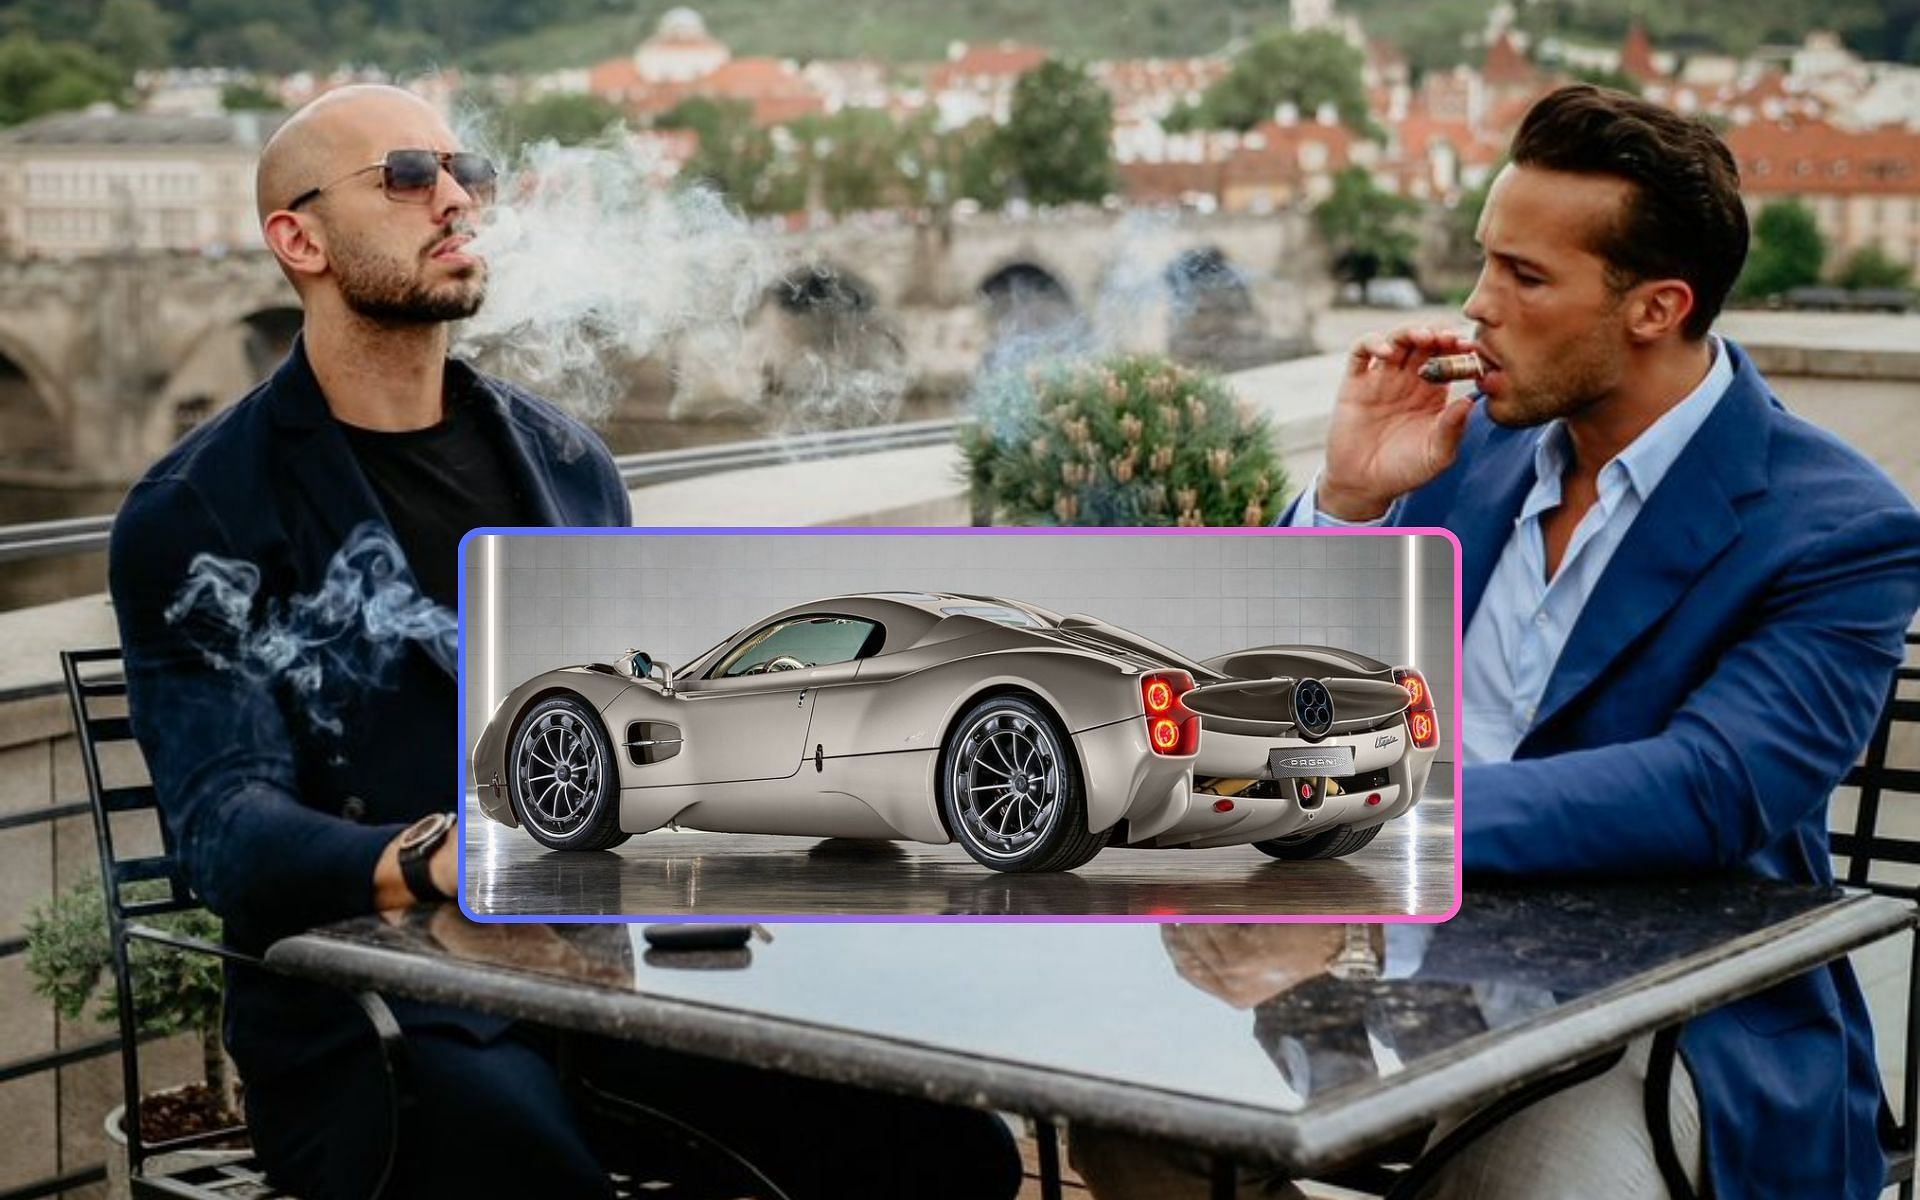 Andrew Tate and his brother Tristan announce stunning new $3 million Pagani purchase 